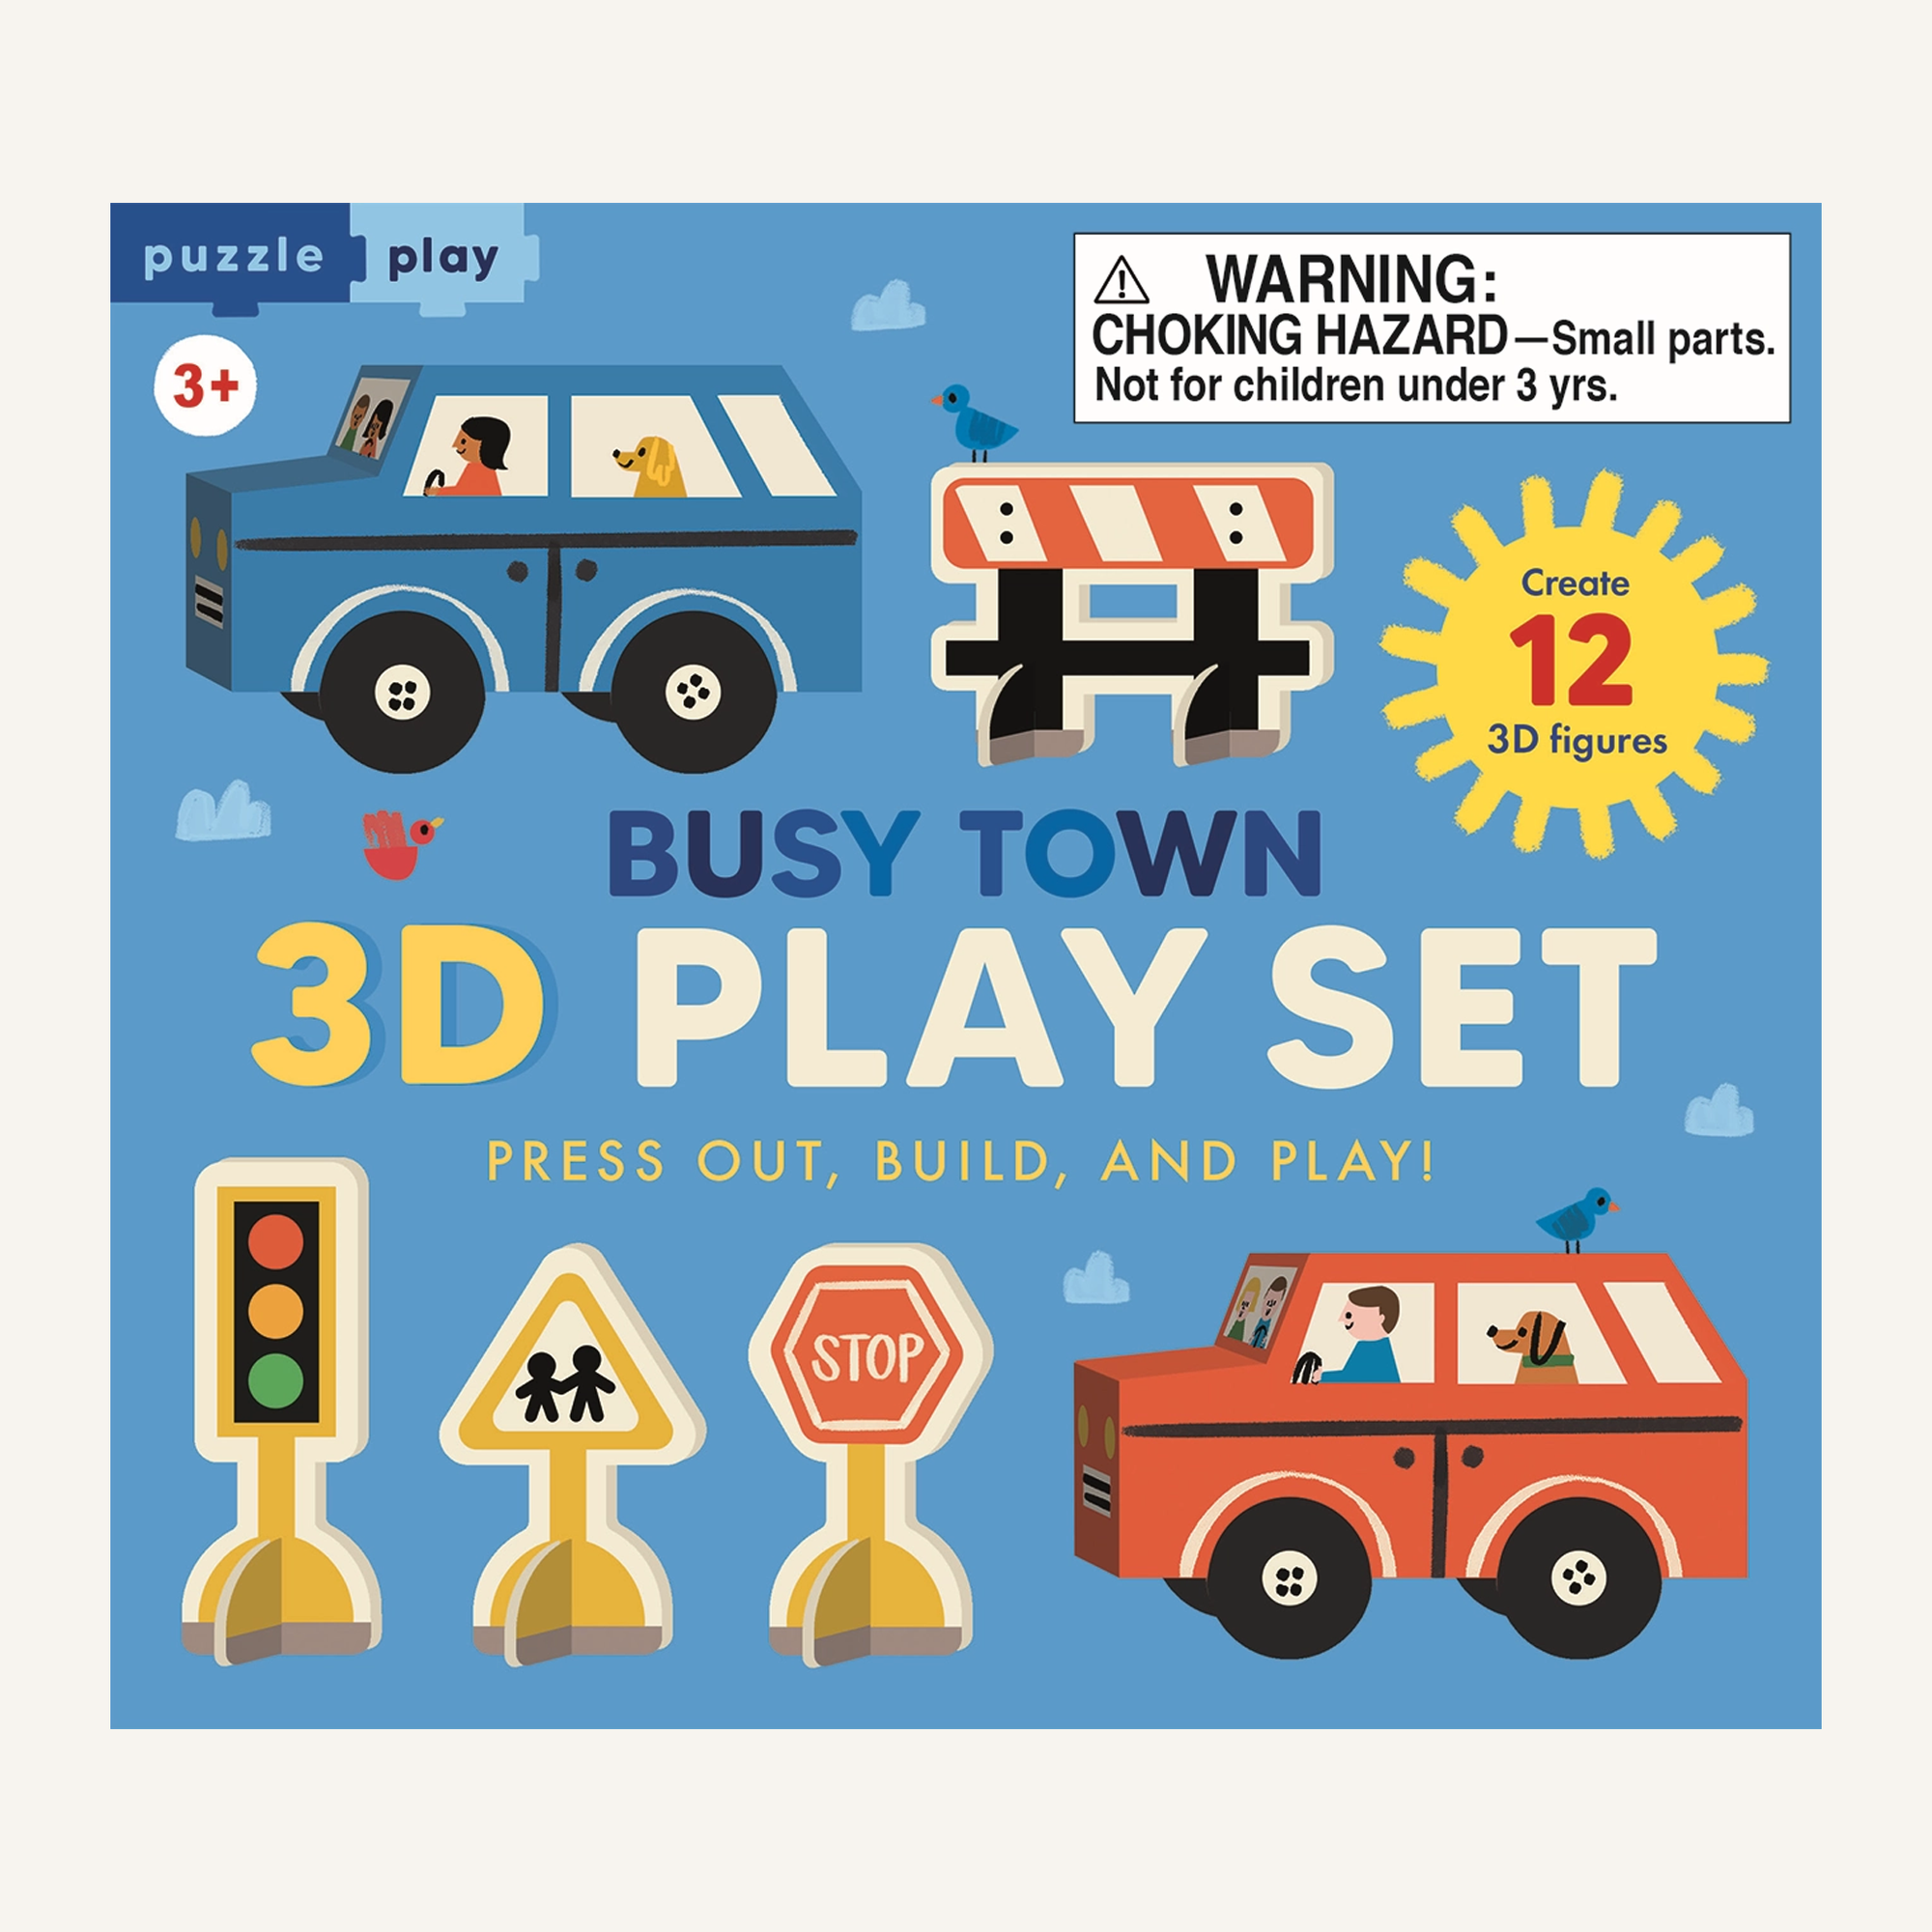 Puzzle Play: Busy Town 3D Play Set